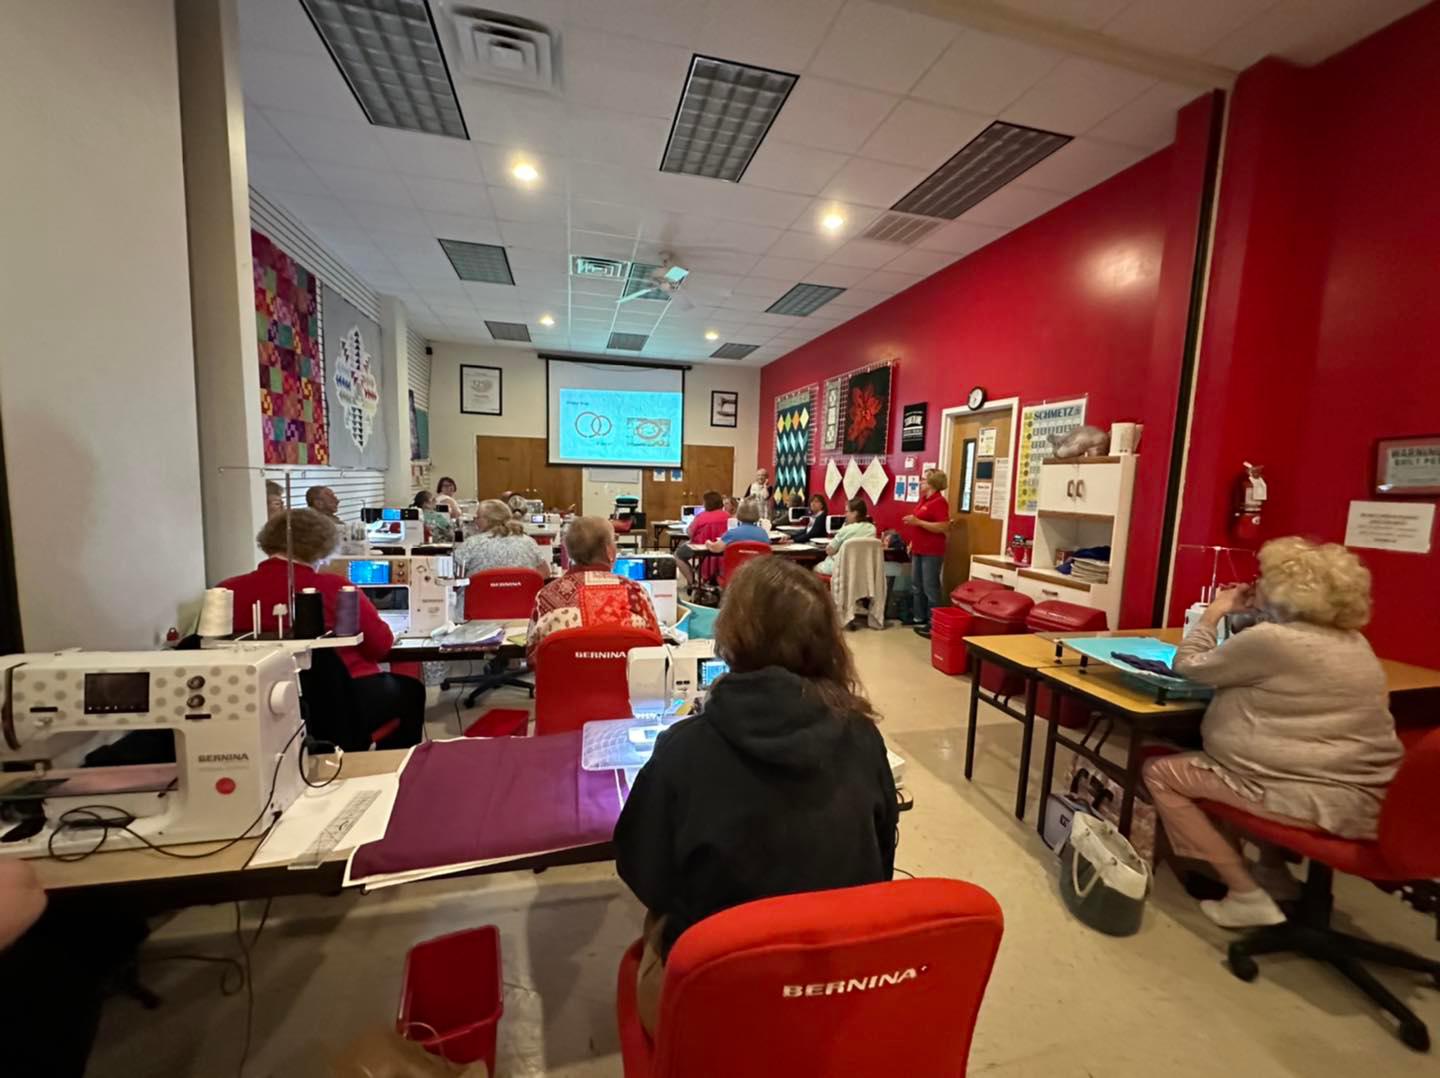 Our Nina McVeigh event started today. Our Day 3 classes on Saturday, which feature QMATIC and Art & Stitch software, still have openings available.  Call us!